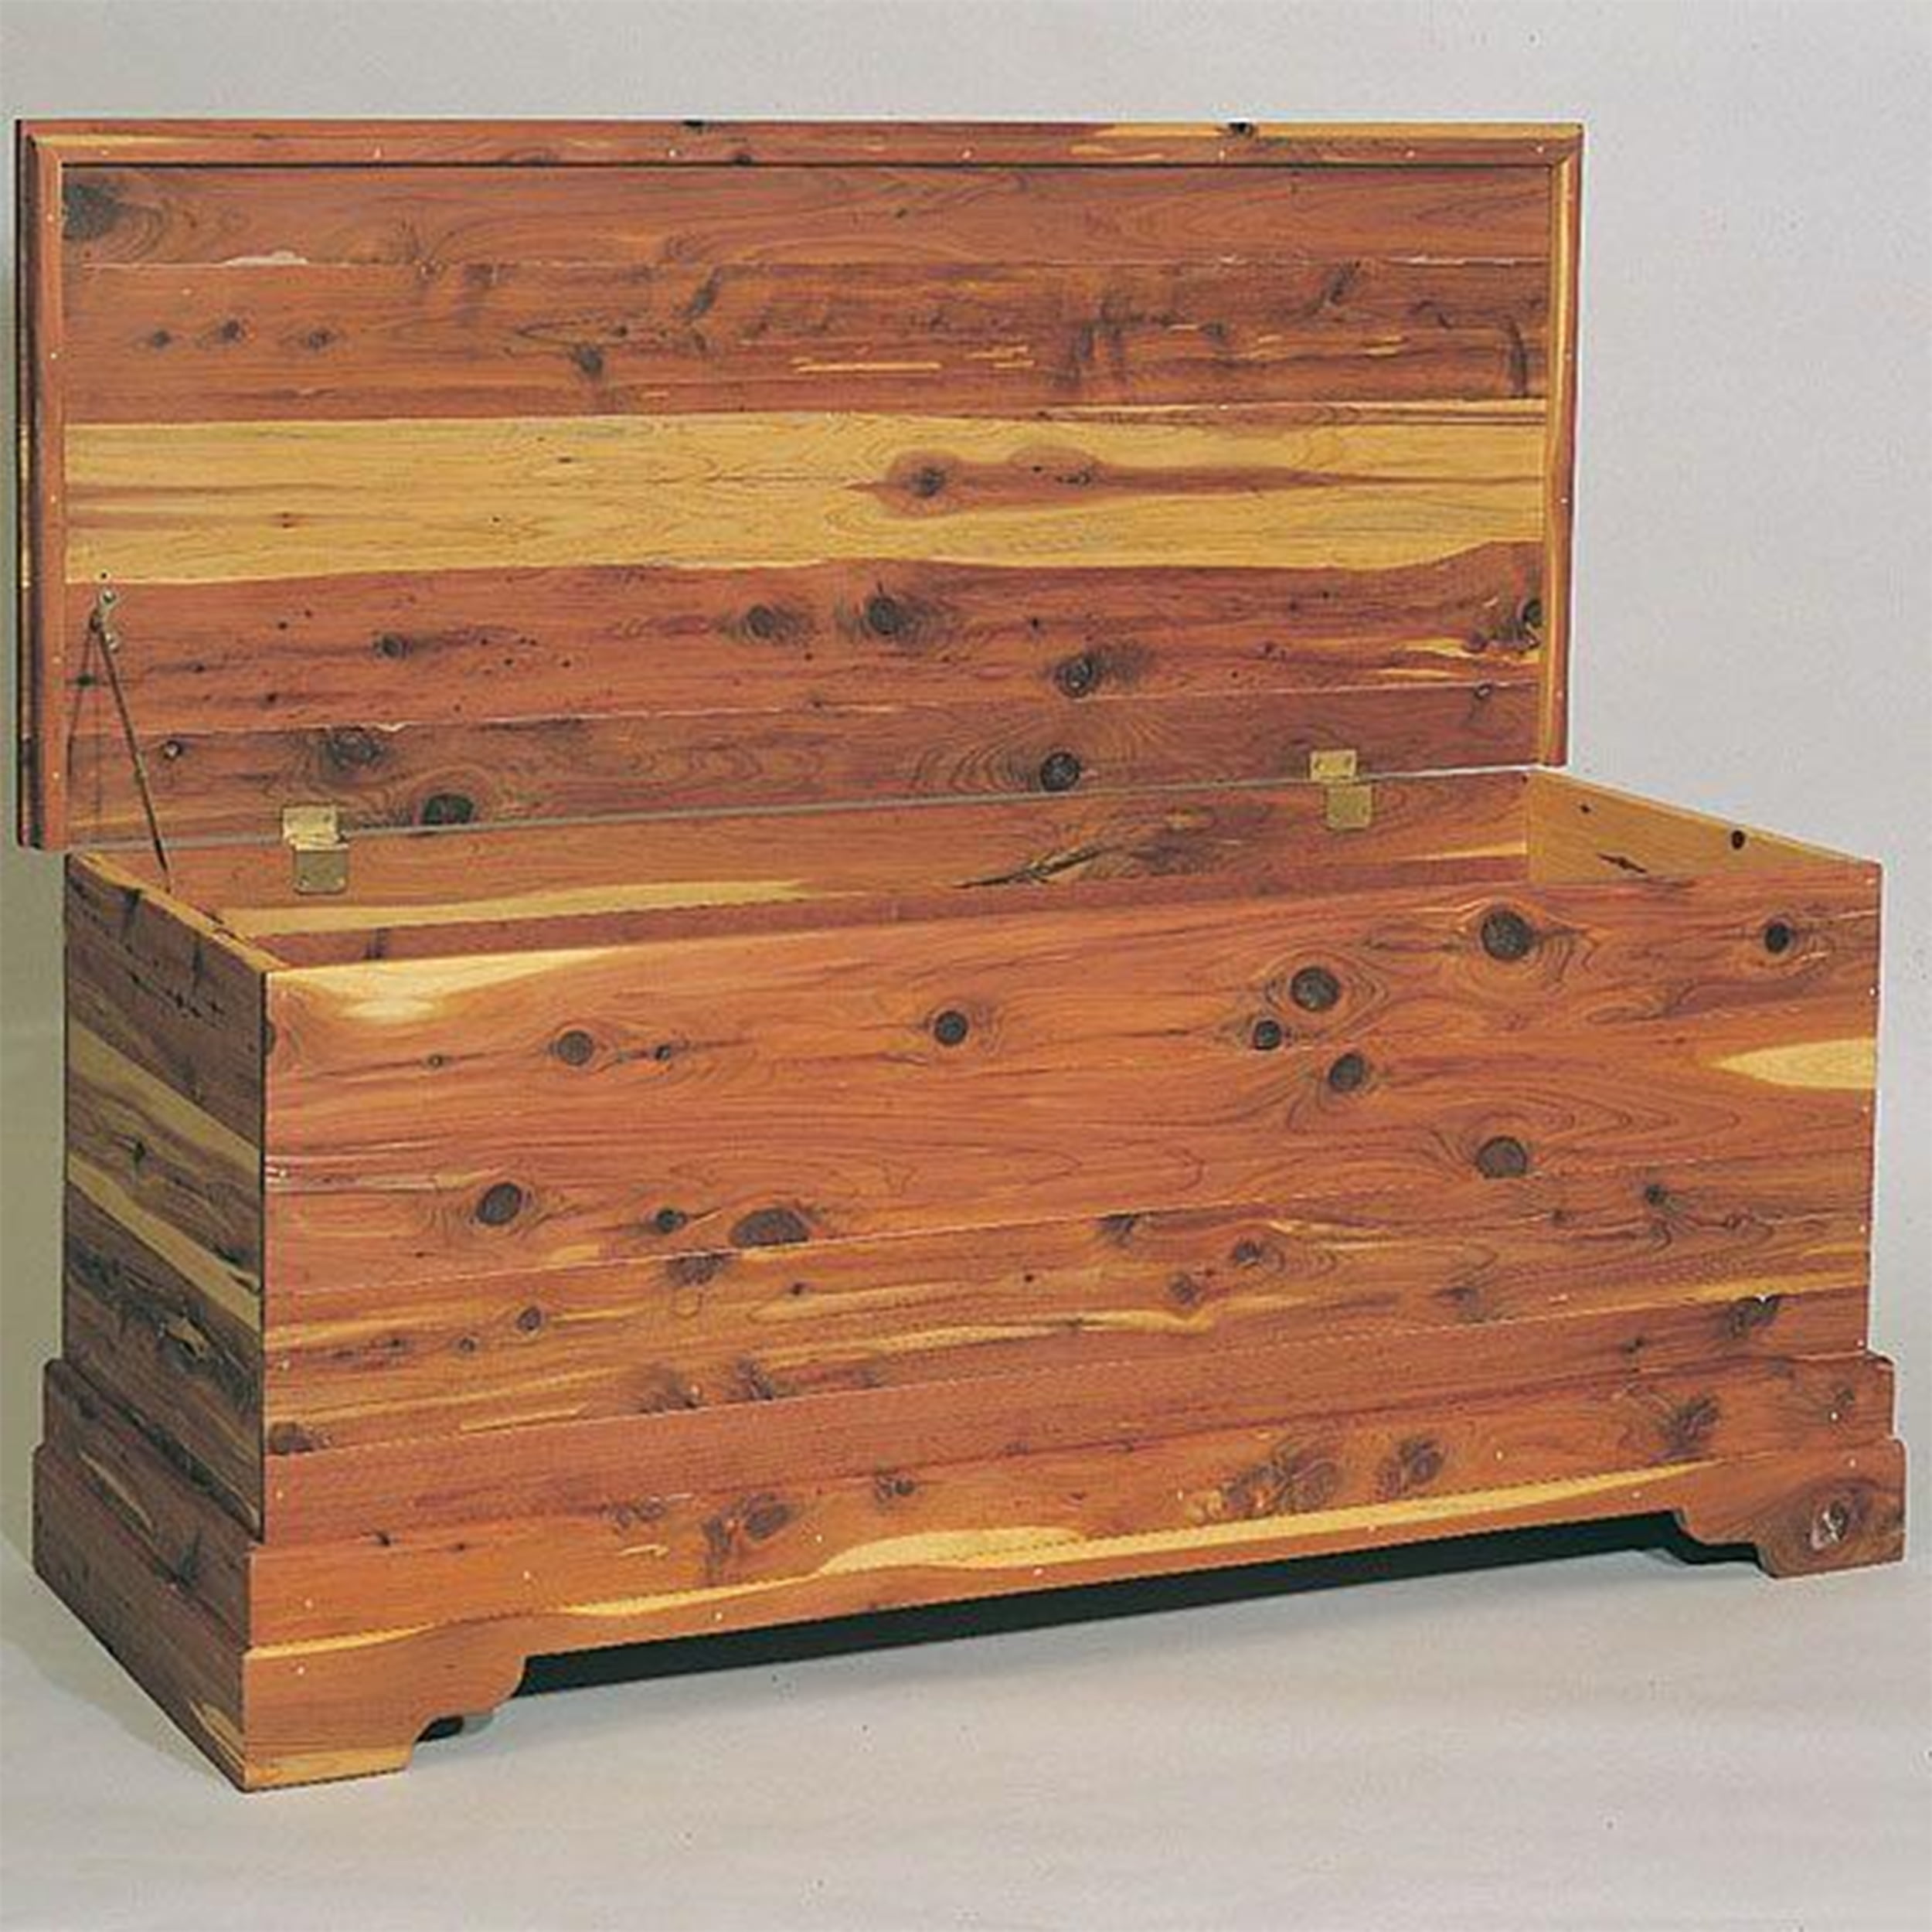 Woodworking Project Paper Plan to Build Cedar Chest, Plan